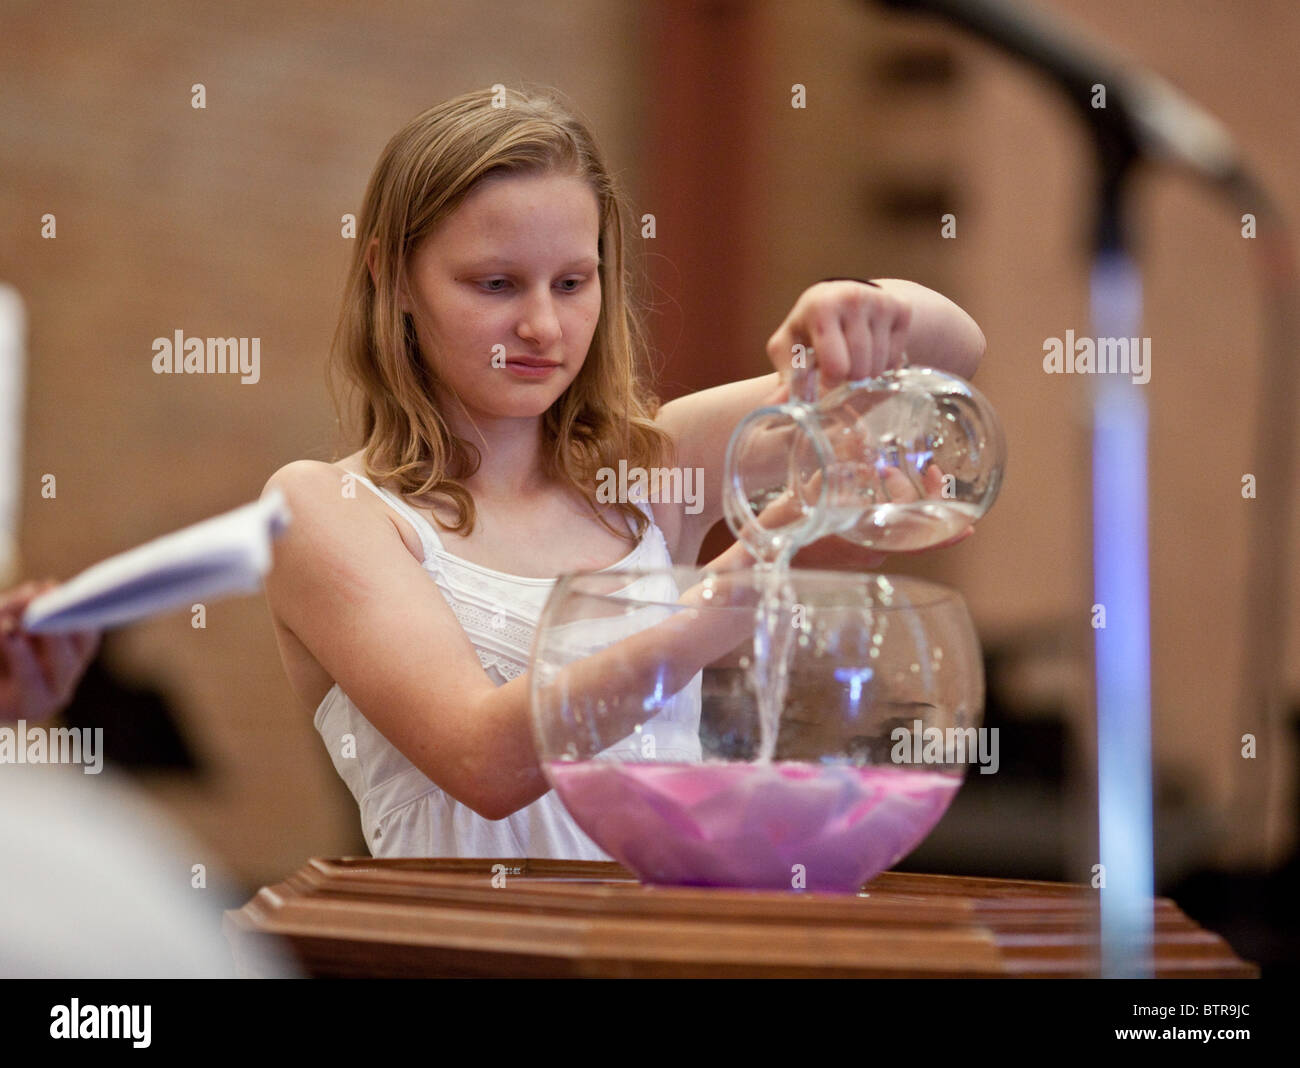 Anglo female teen pours baptismal water into bowl with pink slips of paper with wishes written on them during church service Stock Photo